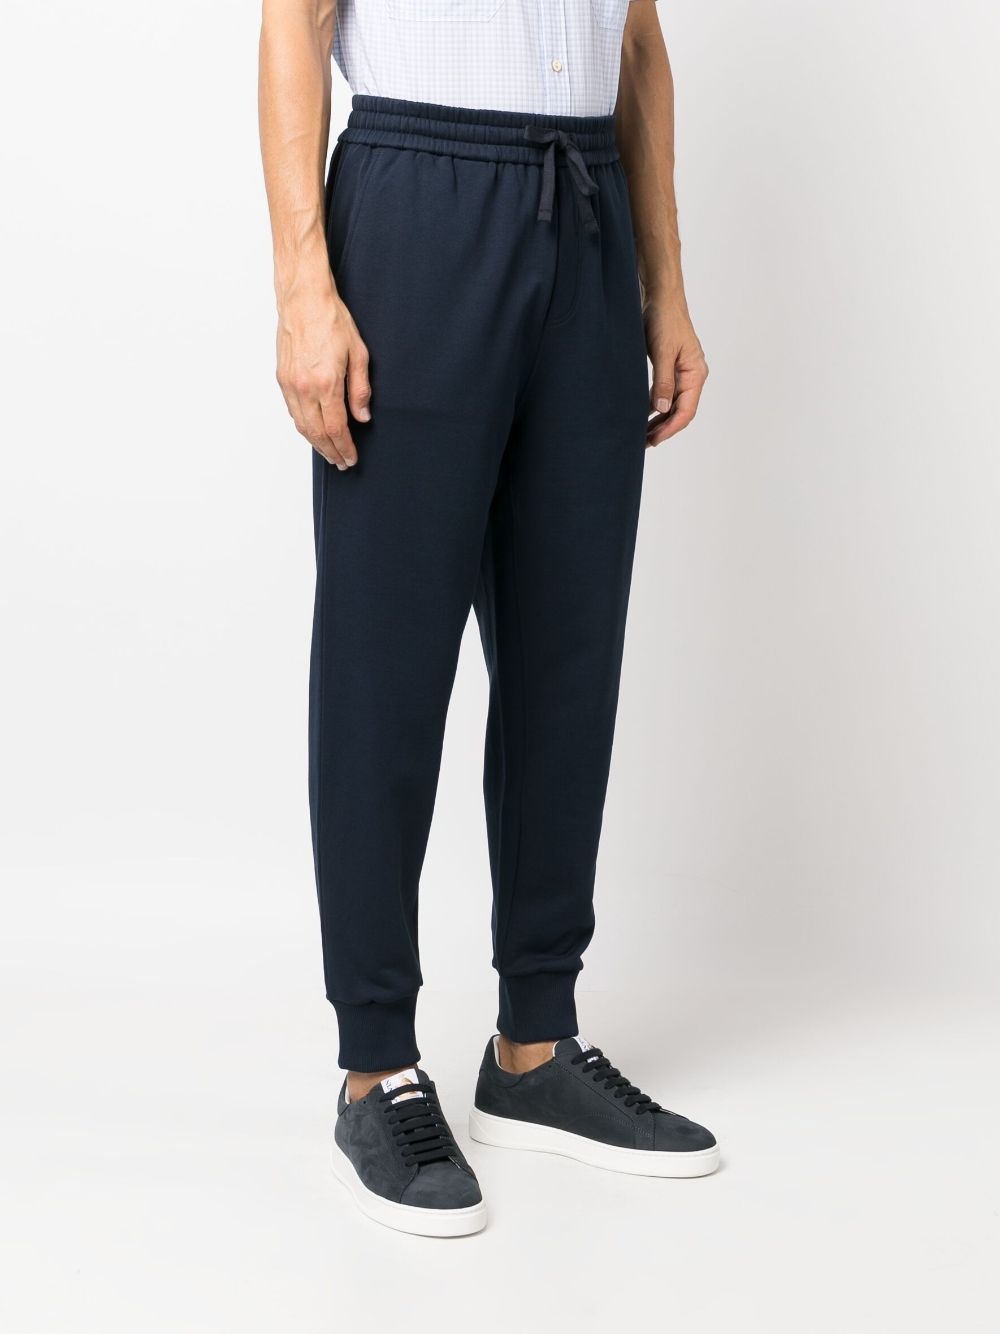 Pegaso-embroidered jersey track pants - 3